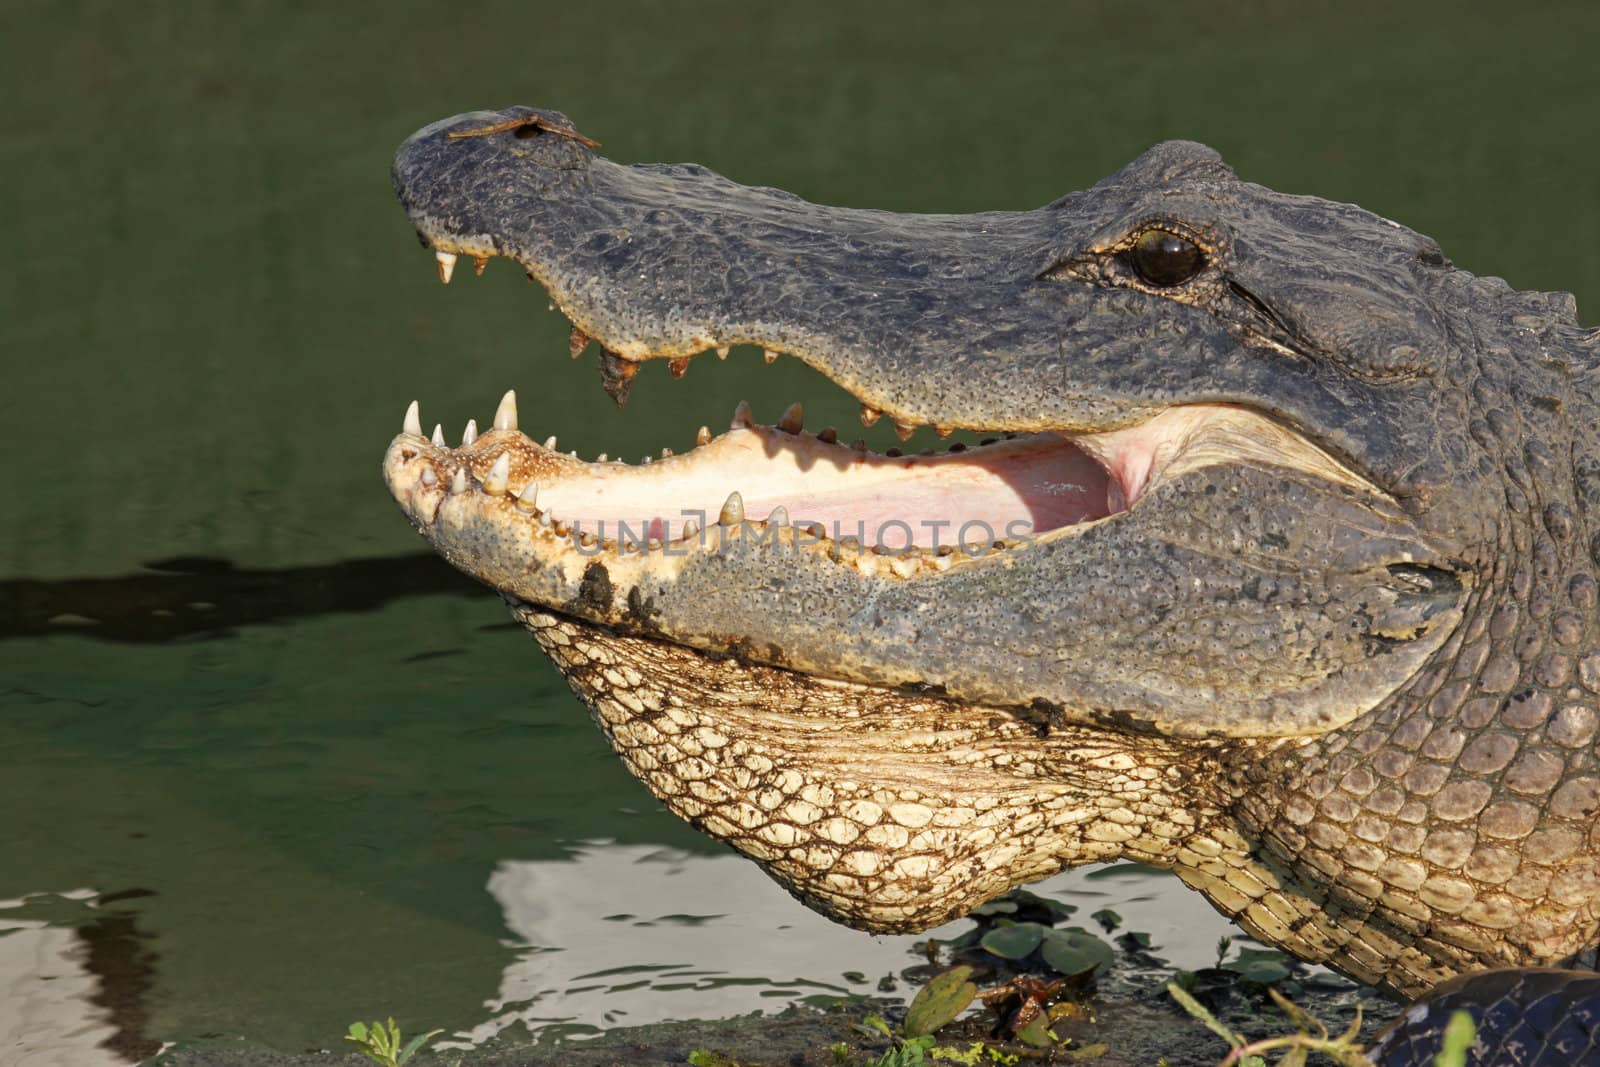 Head of an American alligator by sgoodwin4813